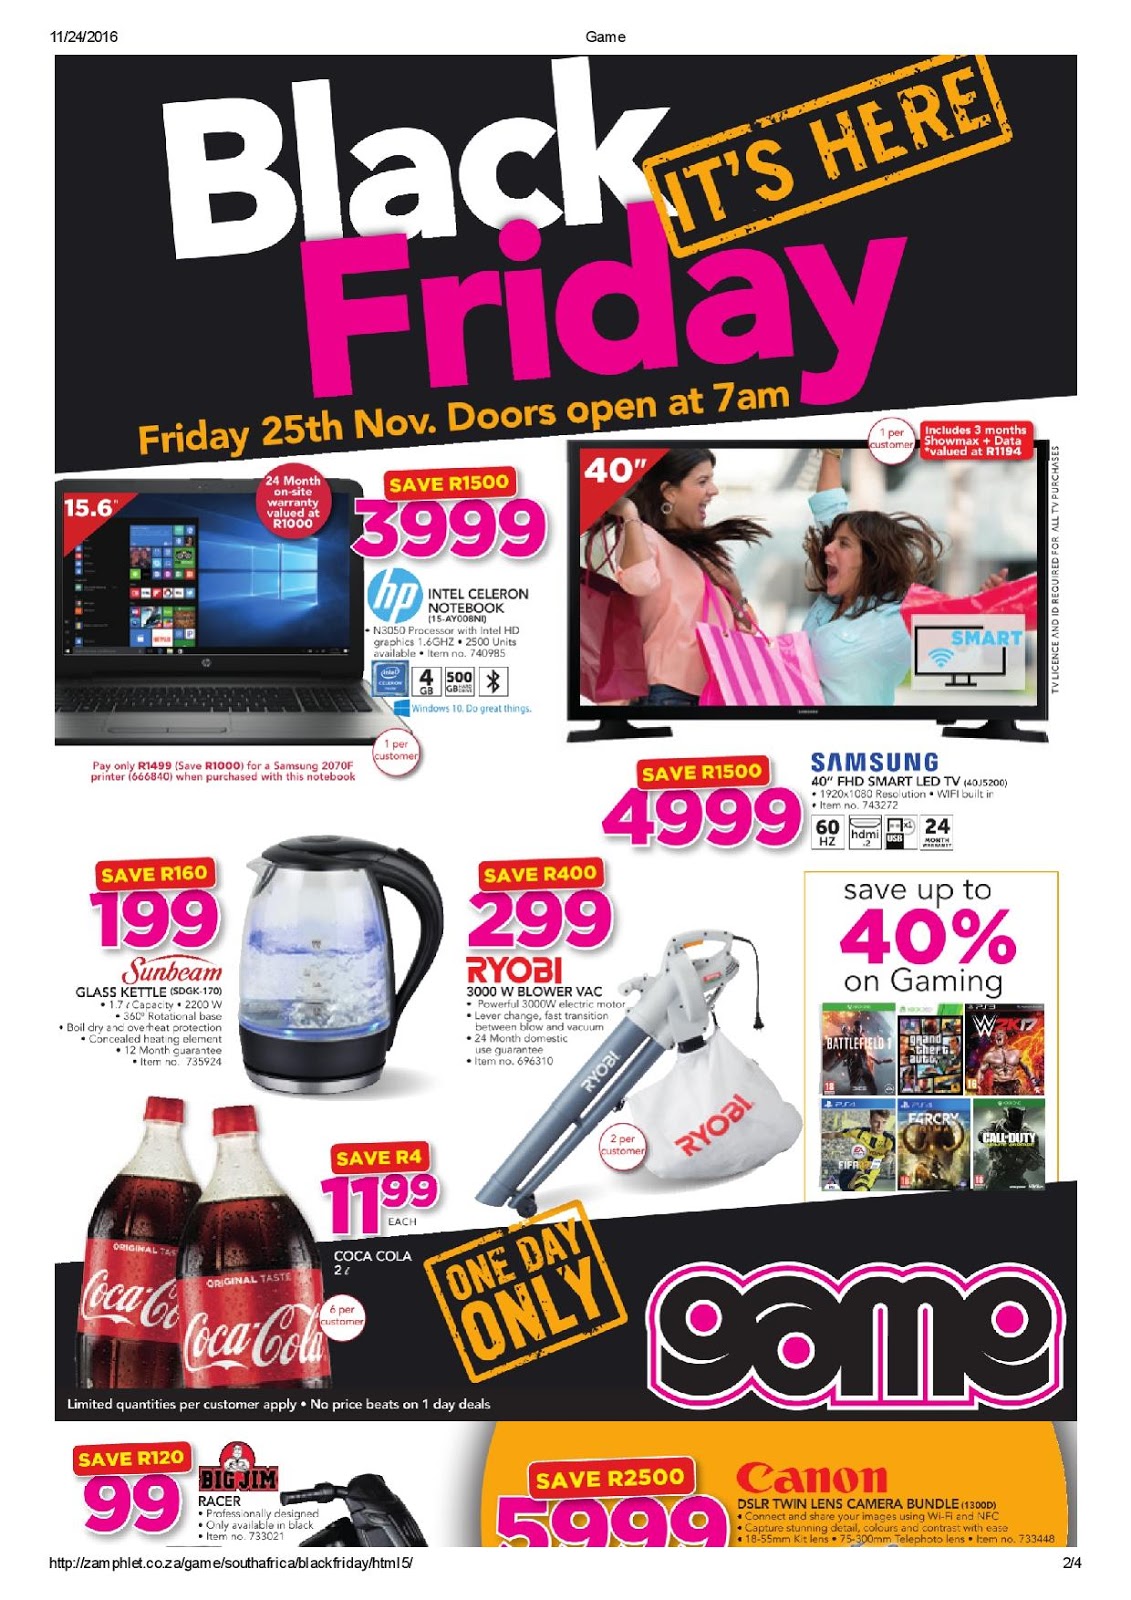 #BlackFriday Game Best Black Friday Hot deals in South Africa - Online Scoops